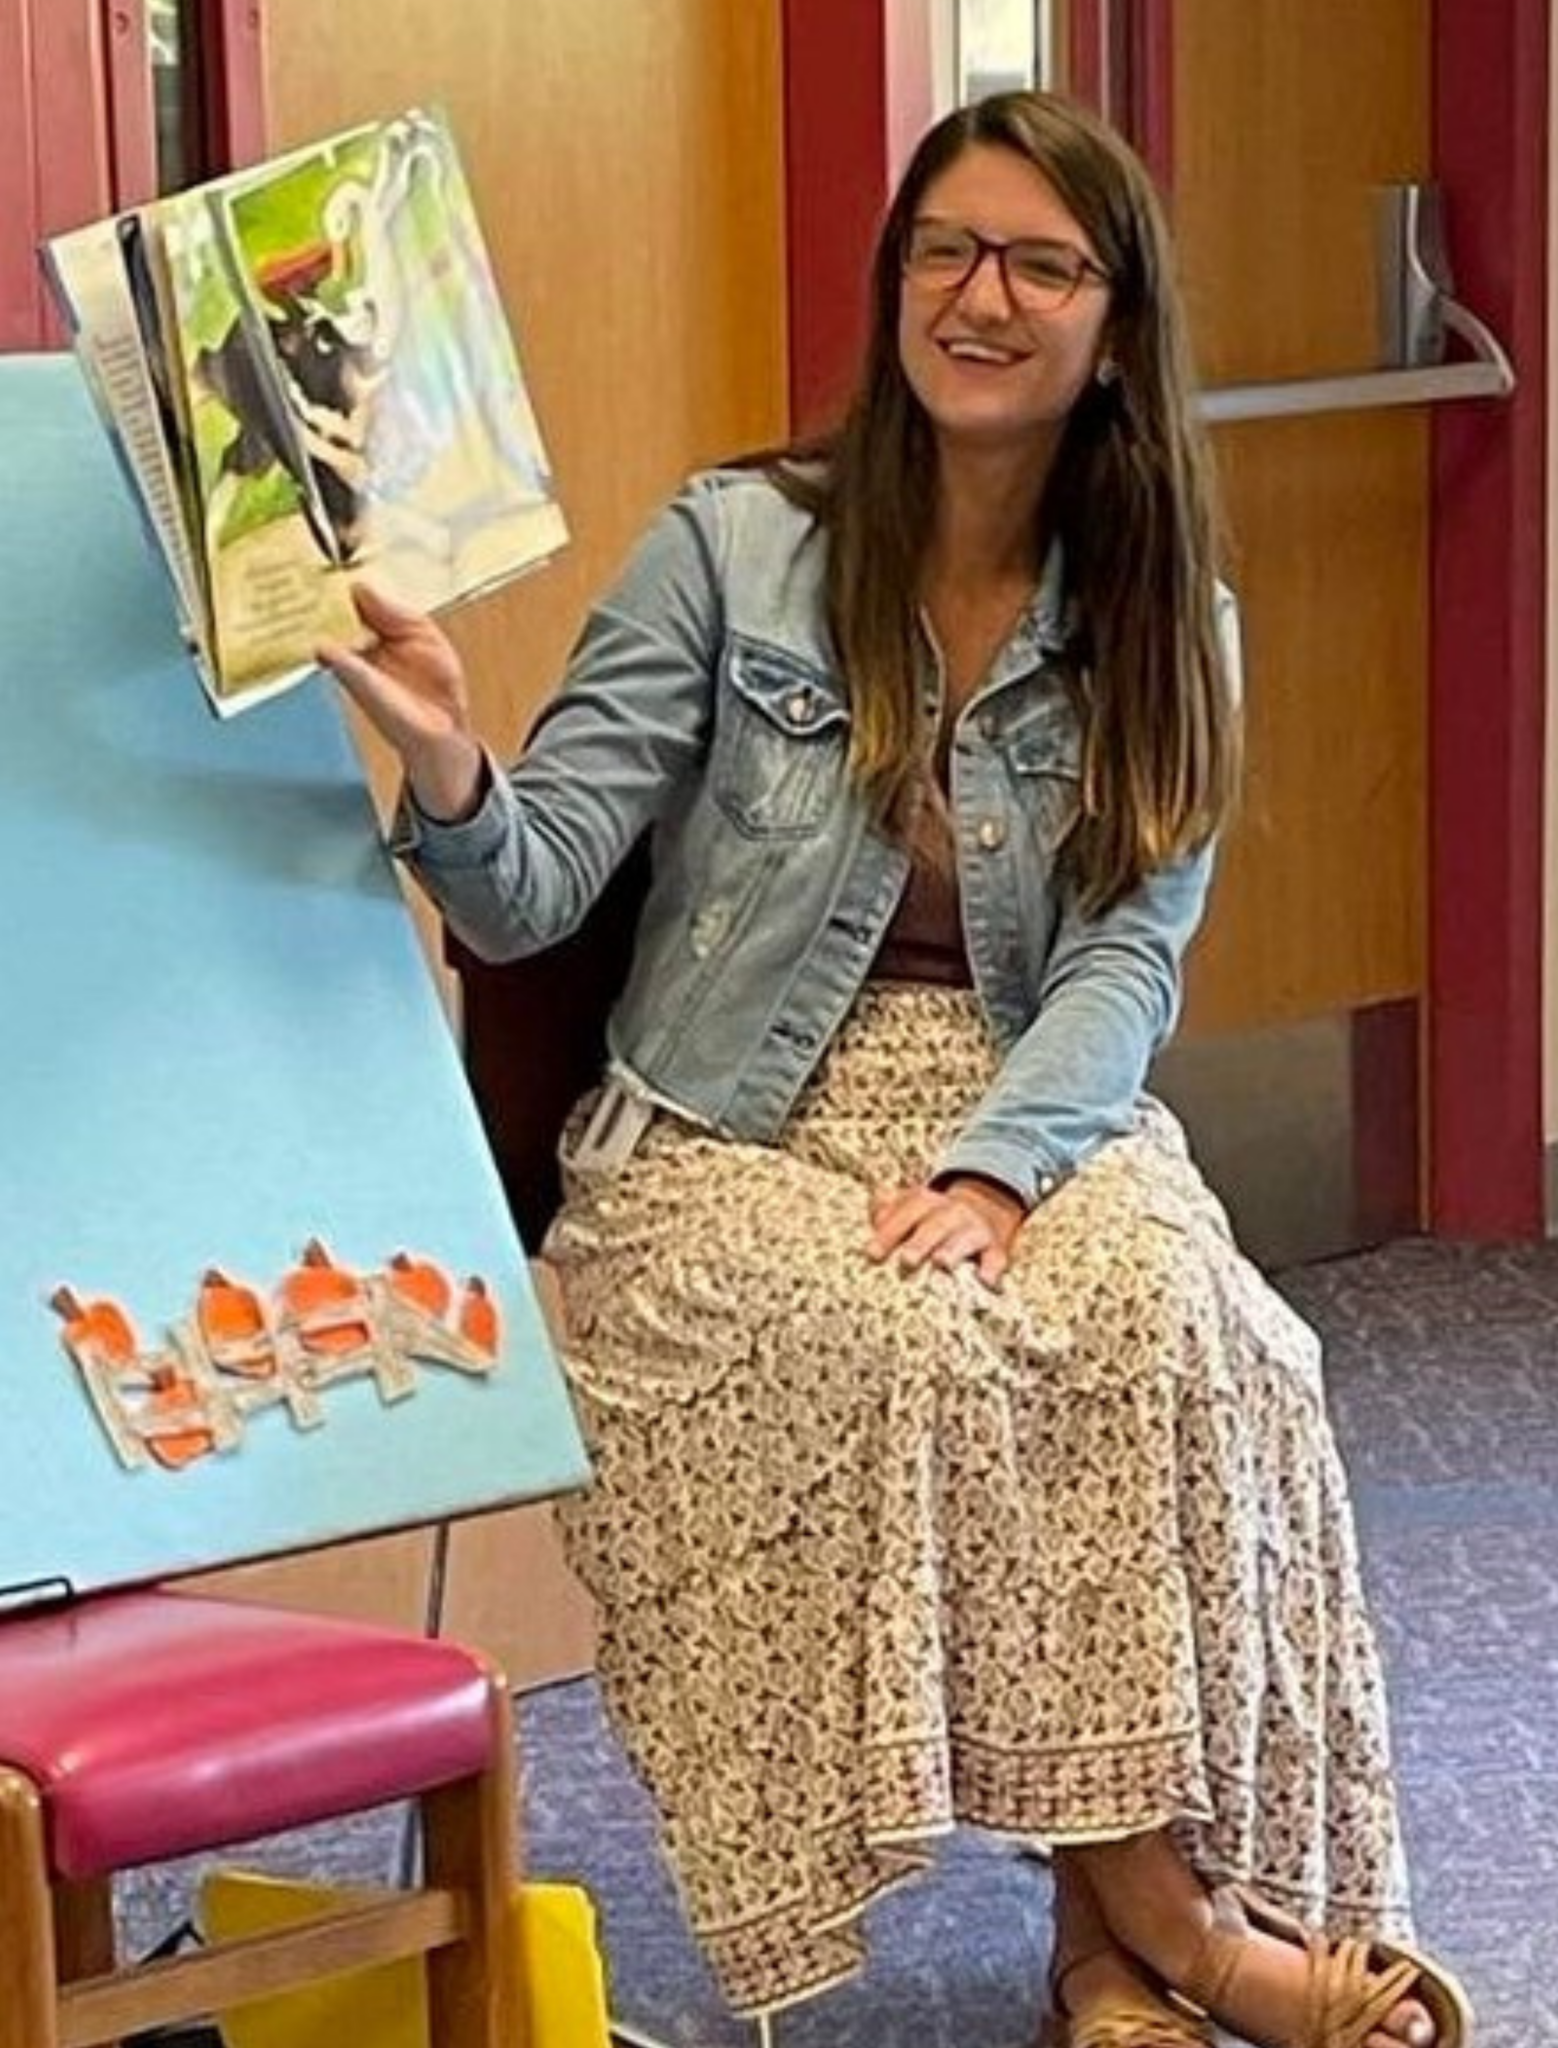 Librarian reads a storybook and shows the pictures